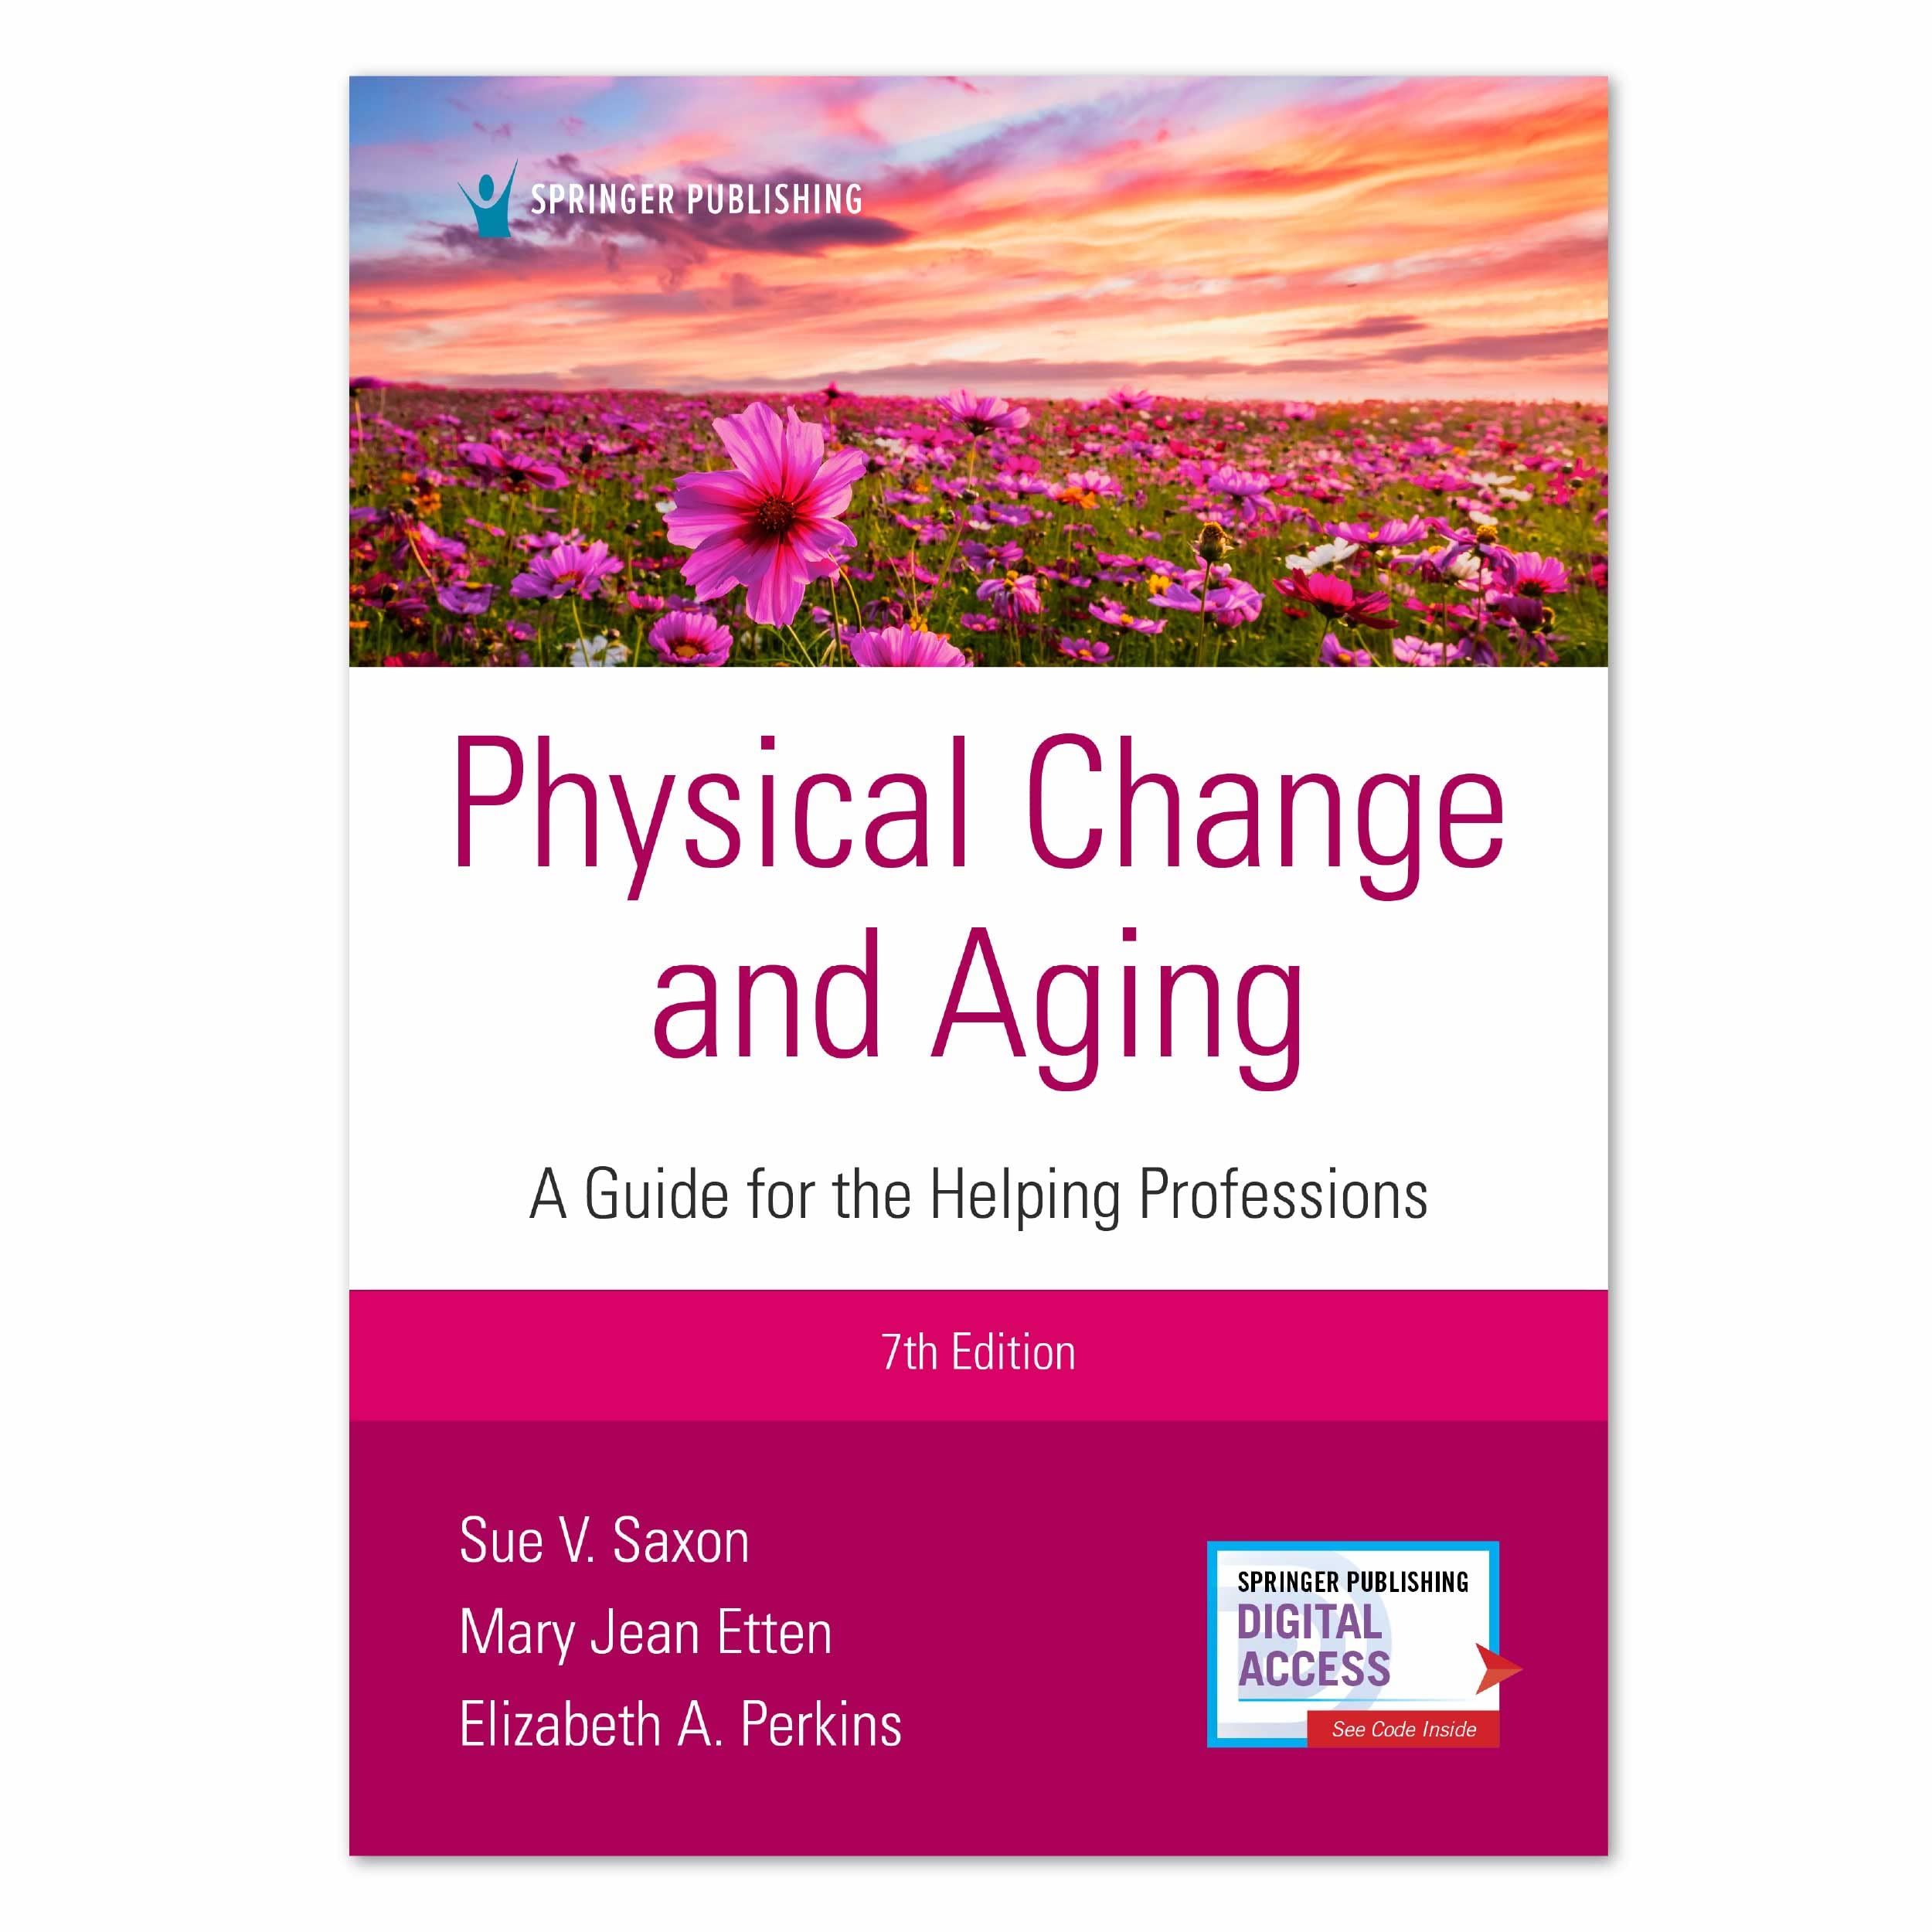 Physical Change and Aging, Seventh Edition: A Guide for Helping Professions